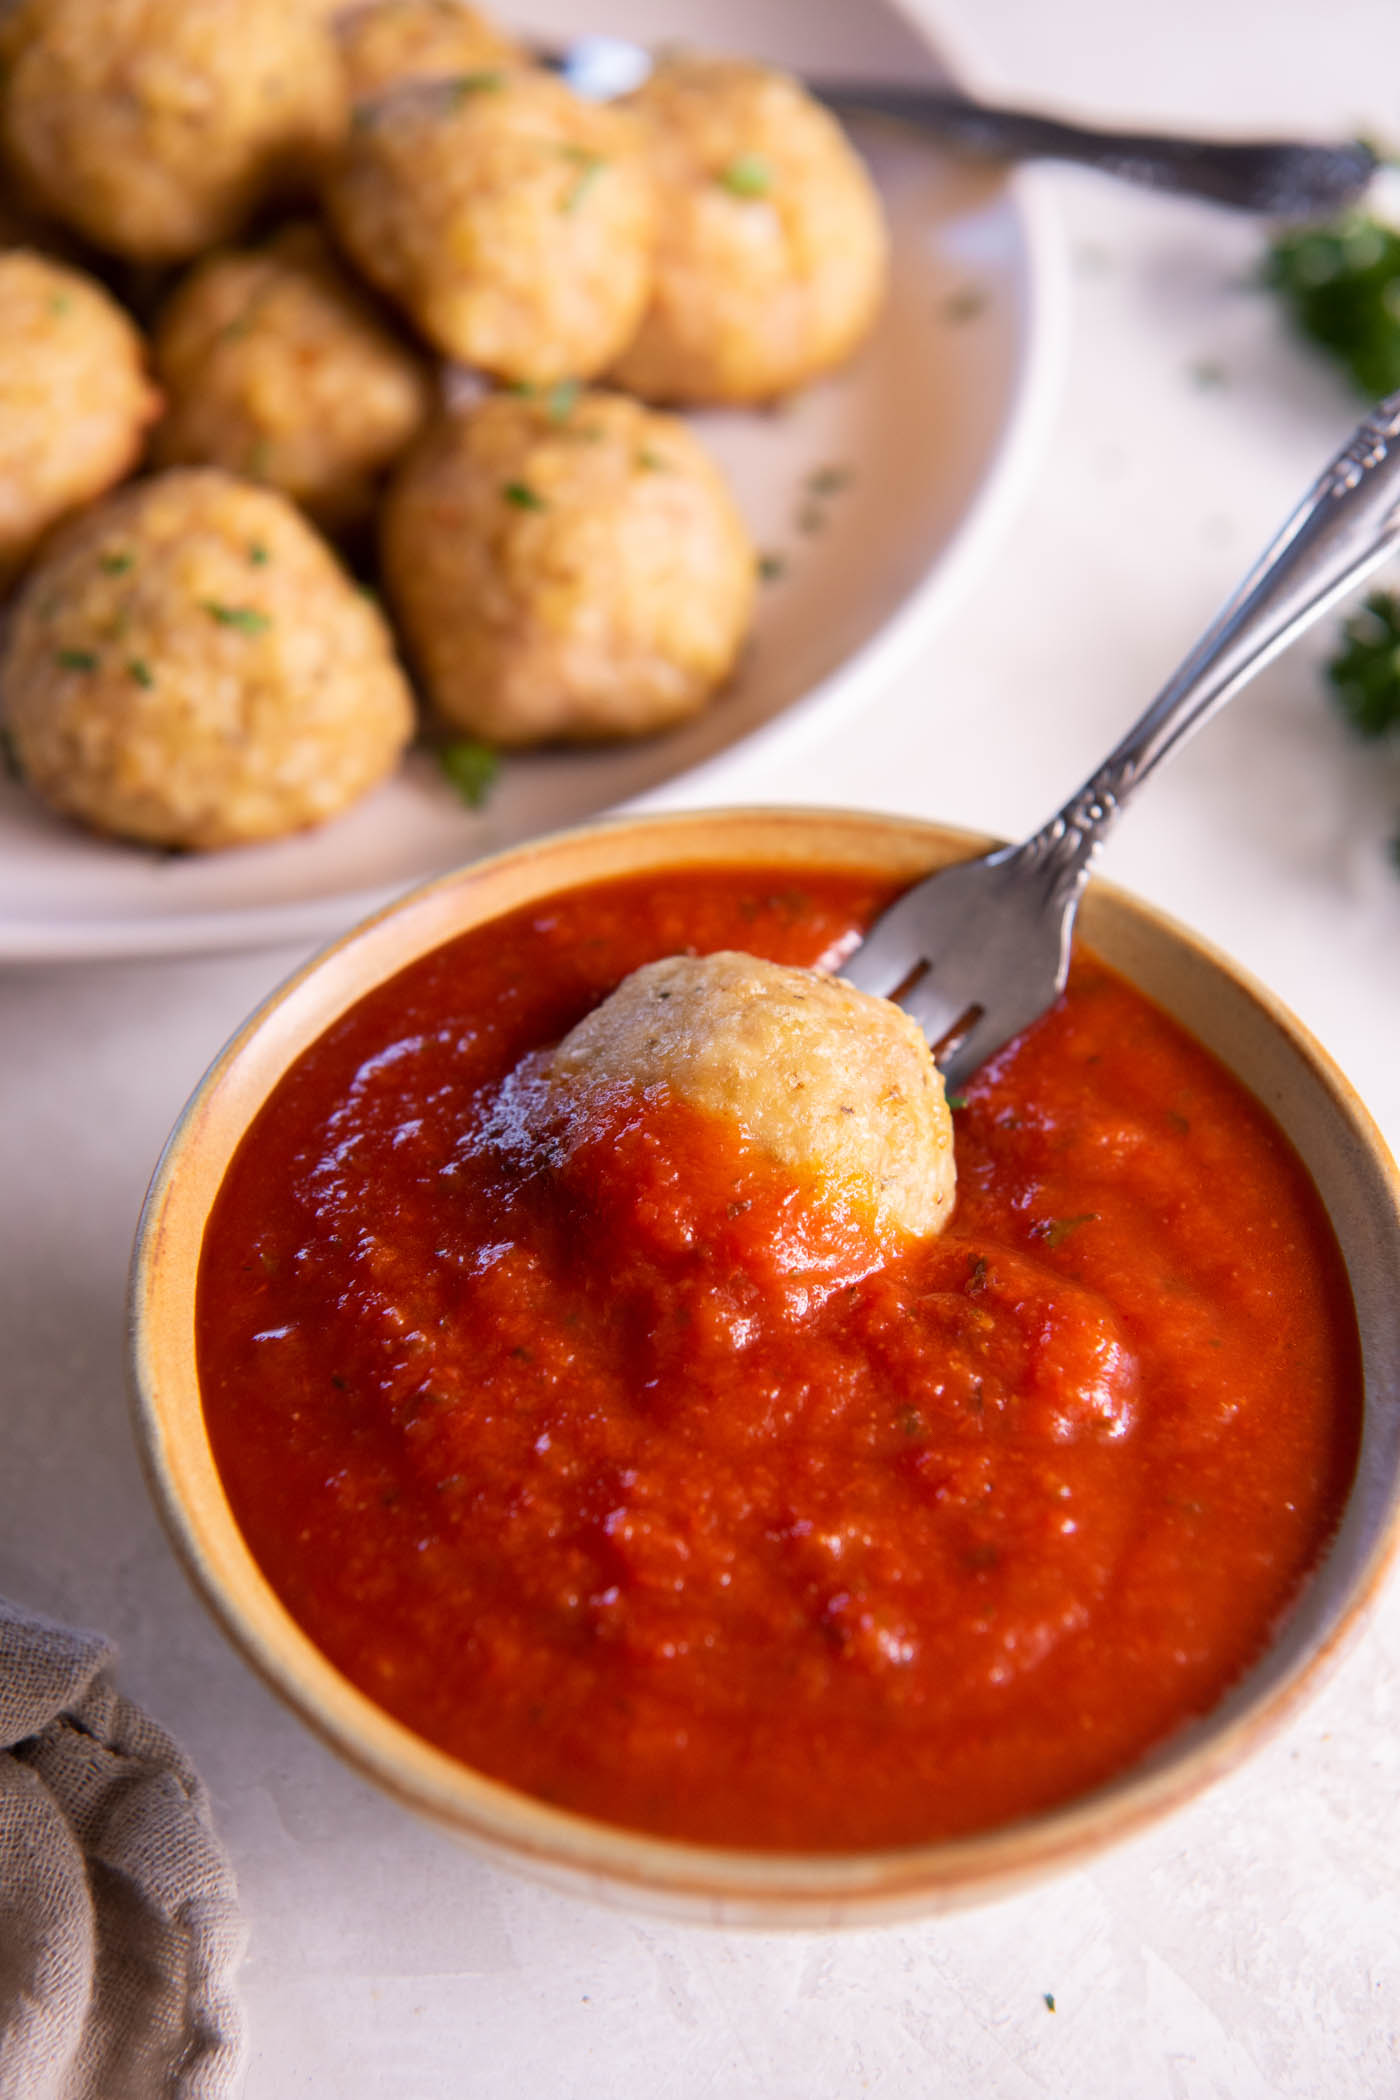 Chicken meatball on a fork dipped in small dish of marinara sauce.